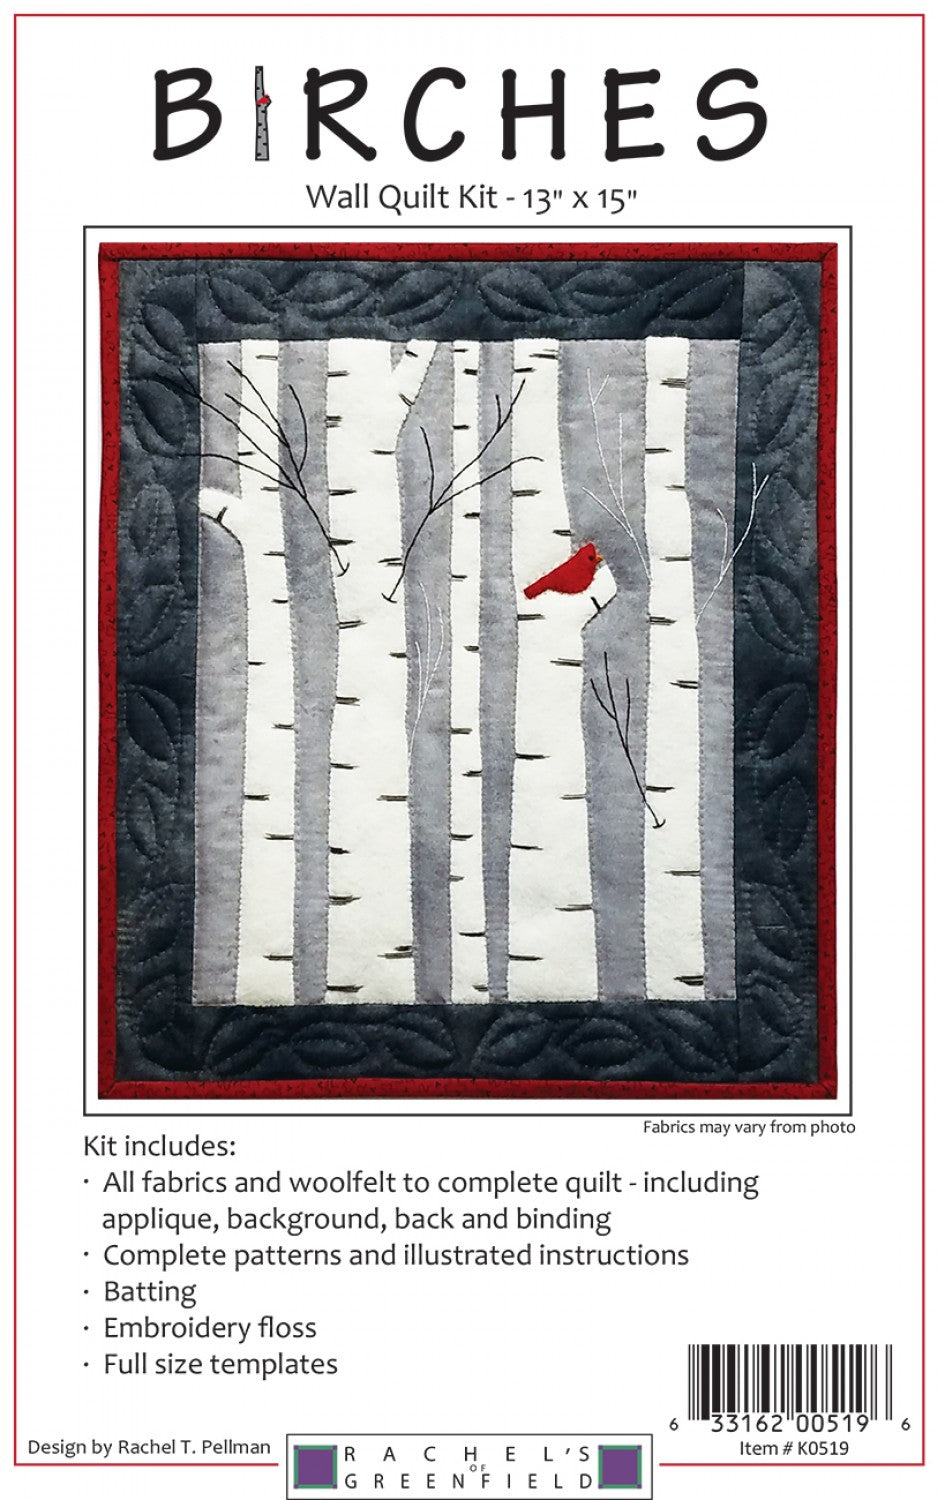 Birches Wall Quilt Kit